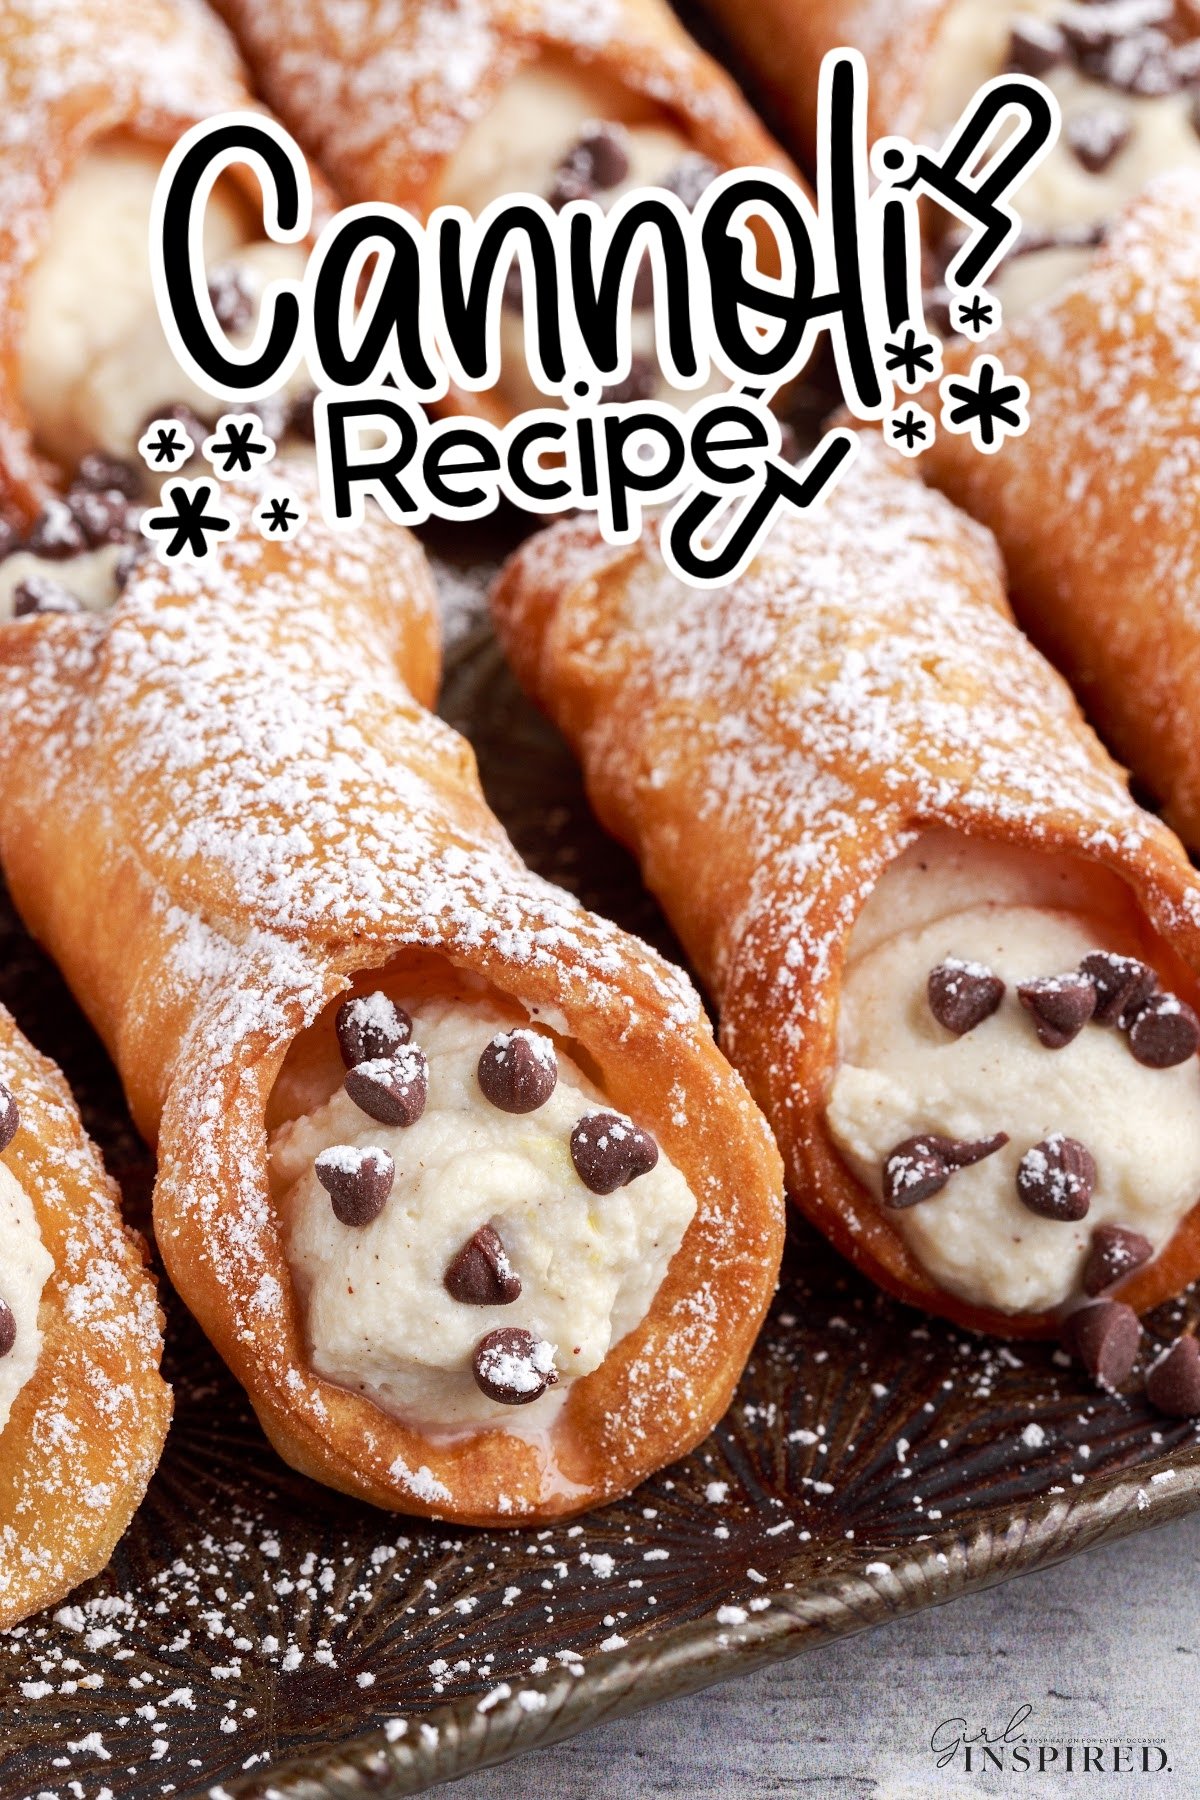 Completed Cannoli's dusted with powdered sugar and text overlay.